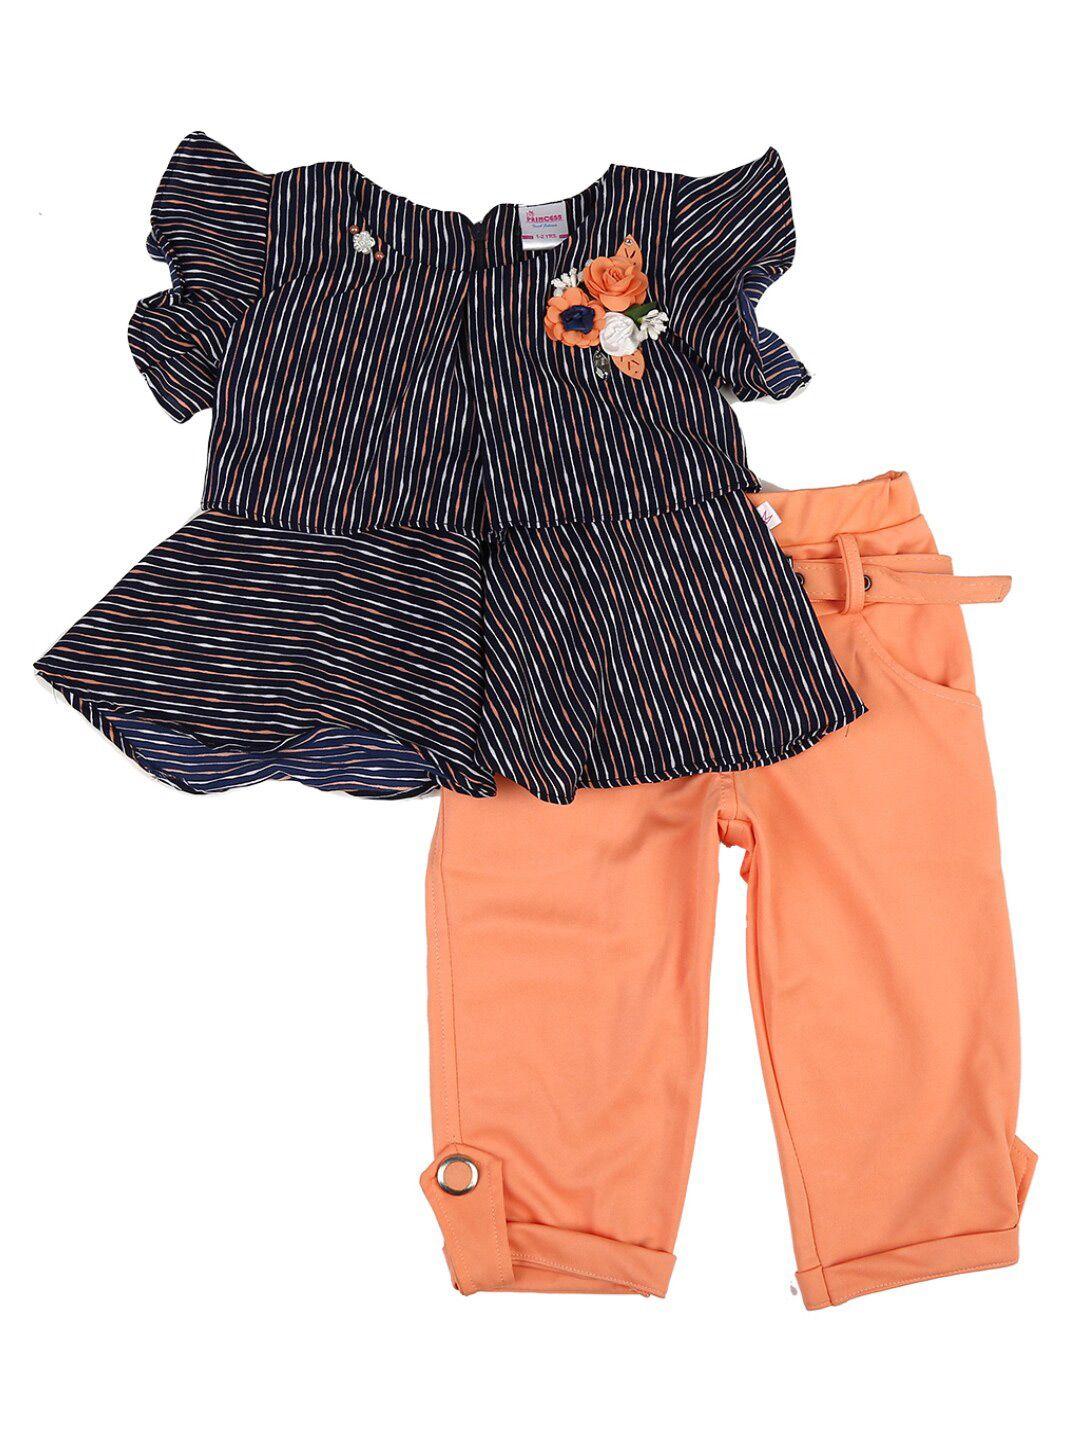 v-mart unisex kids navy blue & peach-coloured striped top with capris